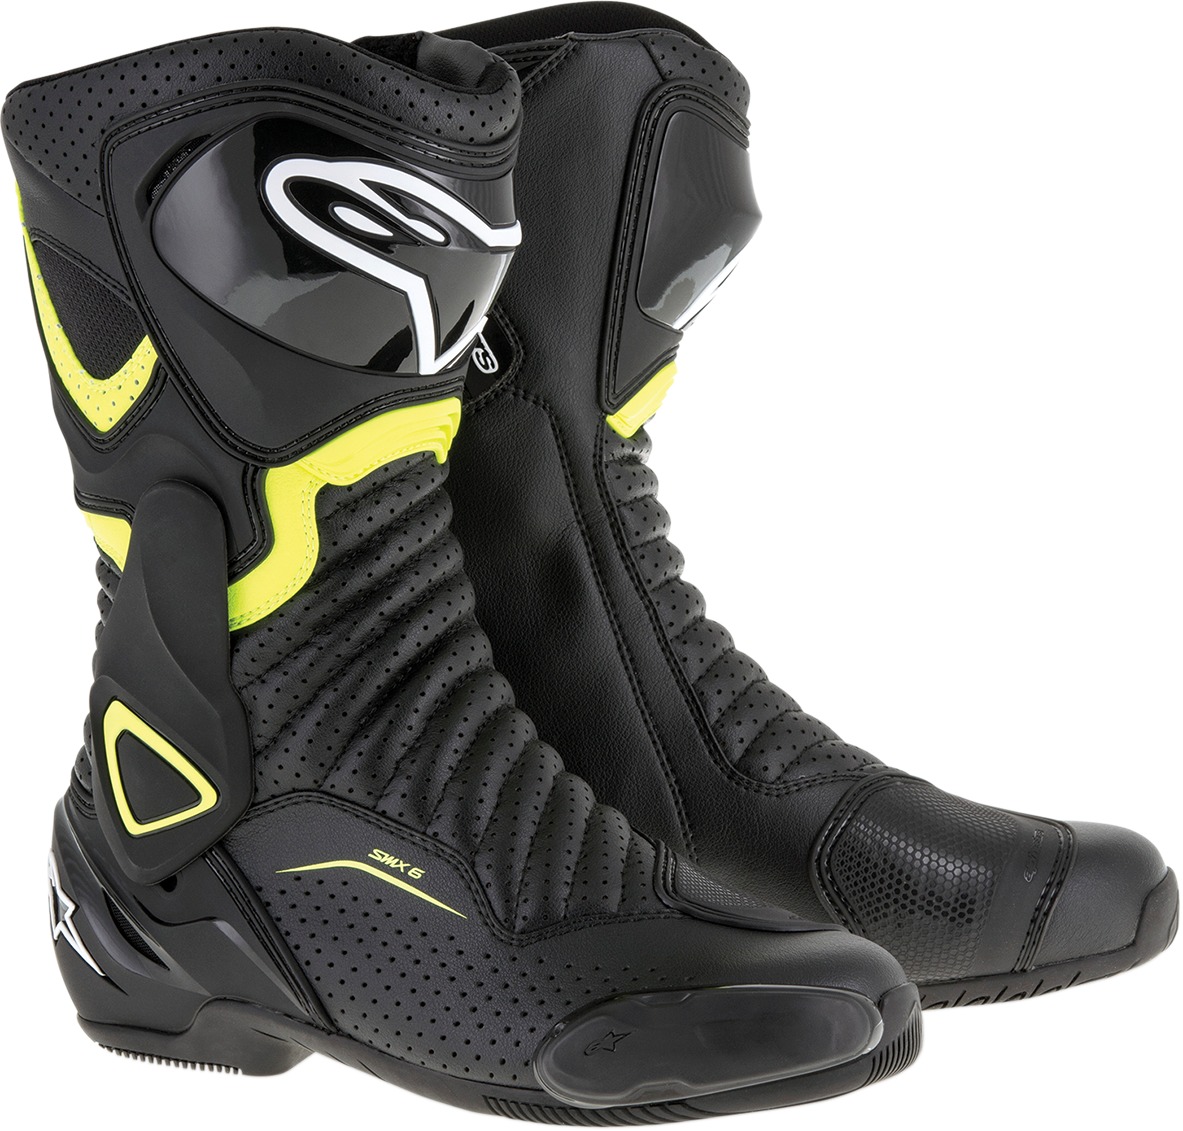 SMX-6v2 Vented Street Riding Boots Black/Yellow US 6.5 - Click Image to Close